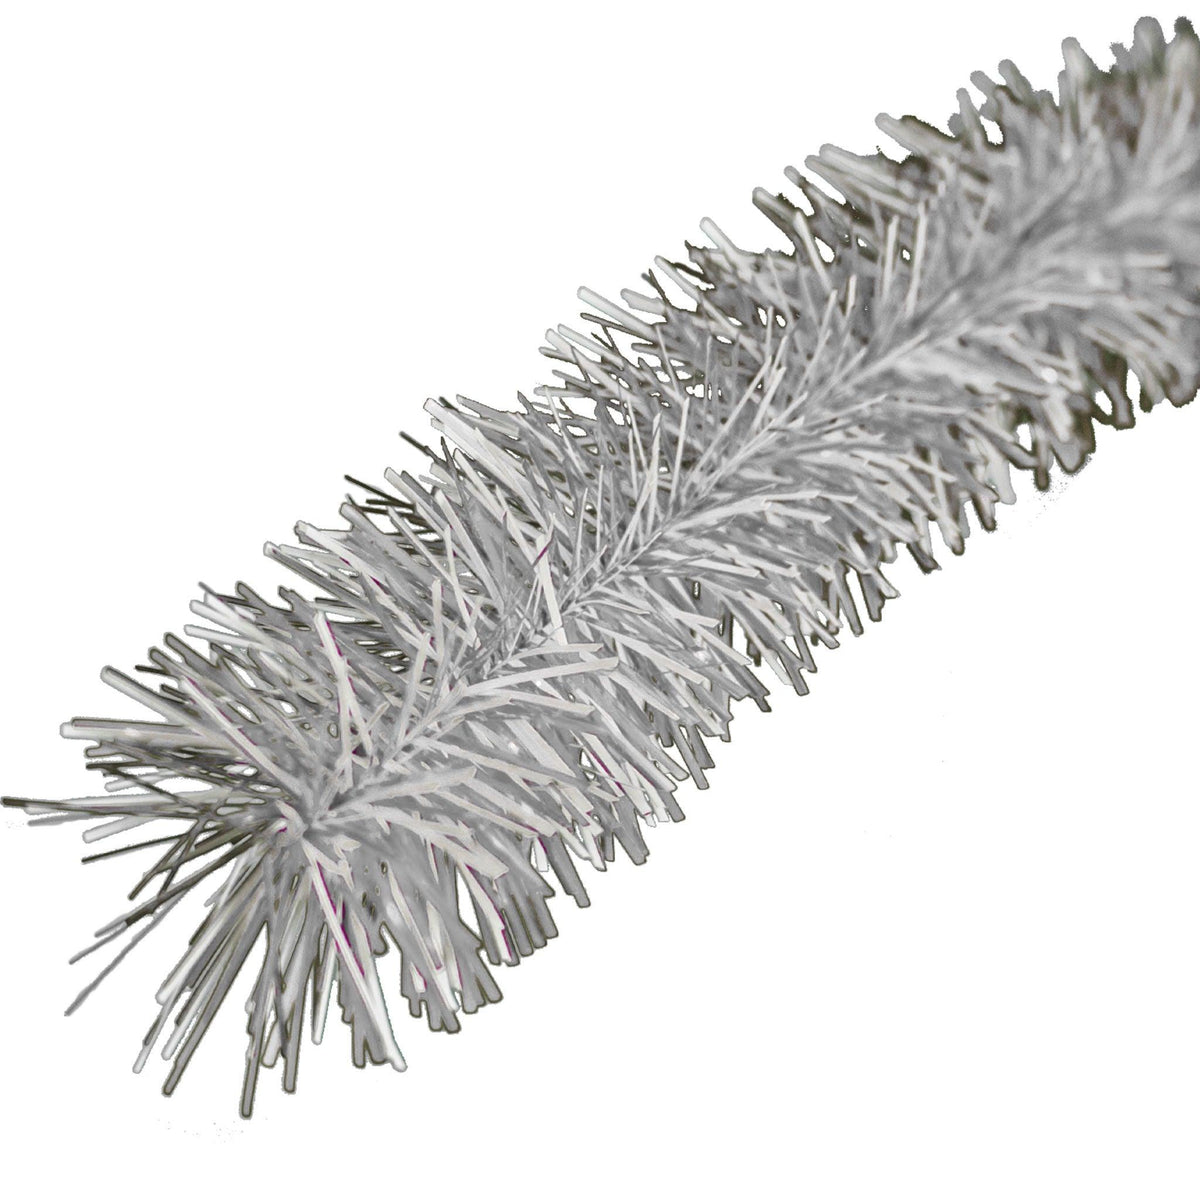 Lee Display's brand new 25ft Shiny White and Metallic Silver Tinsel Garlands and Fringe Embellishments on sale at leedisplay.com